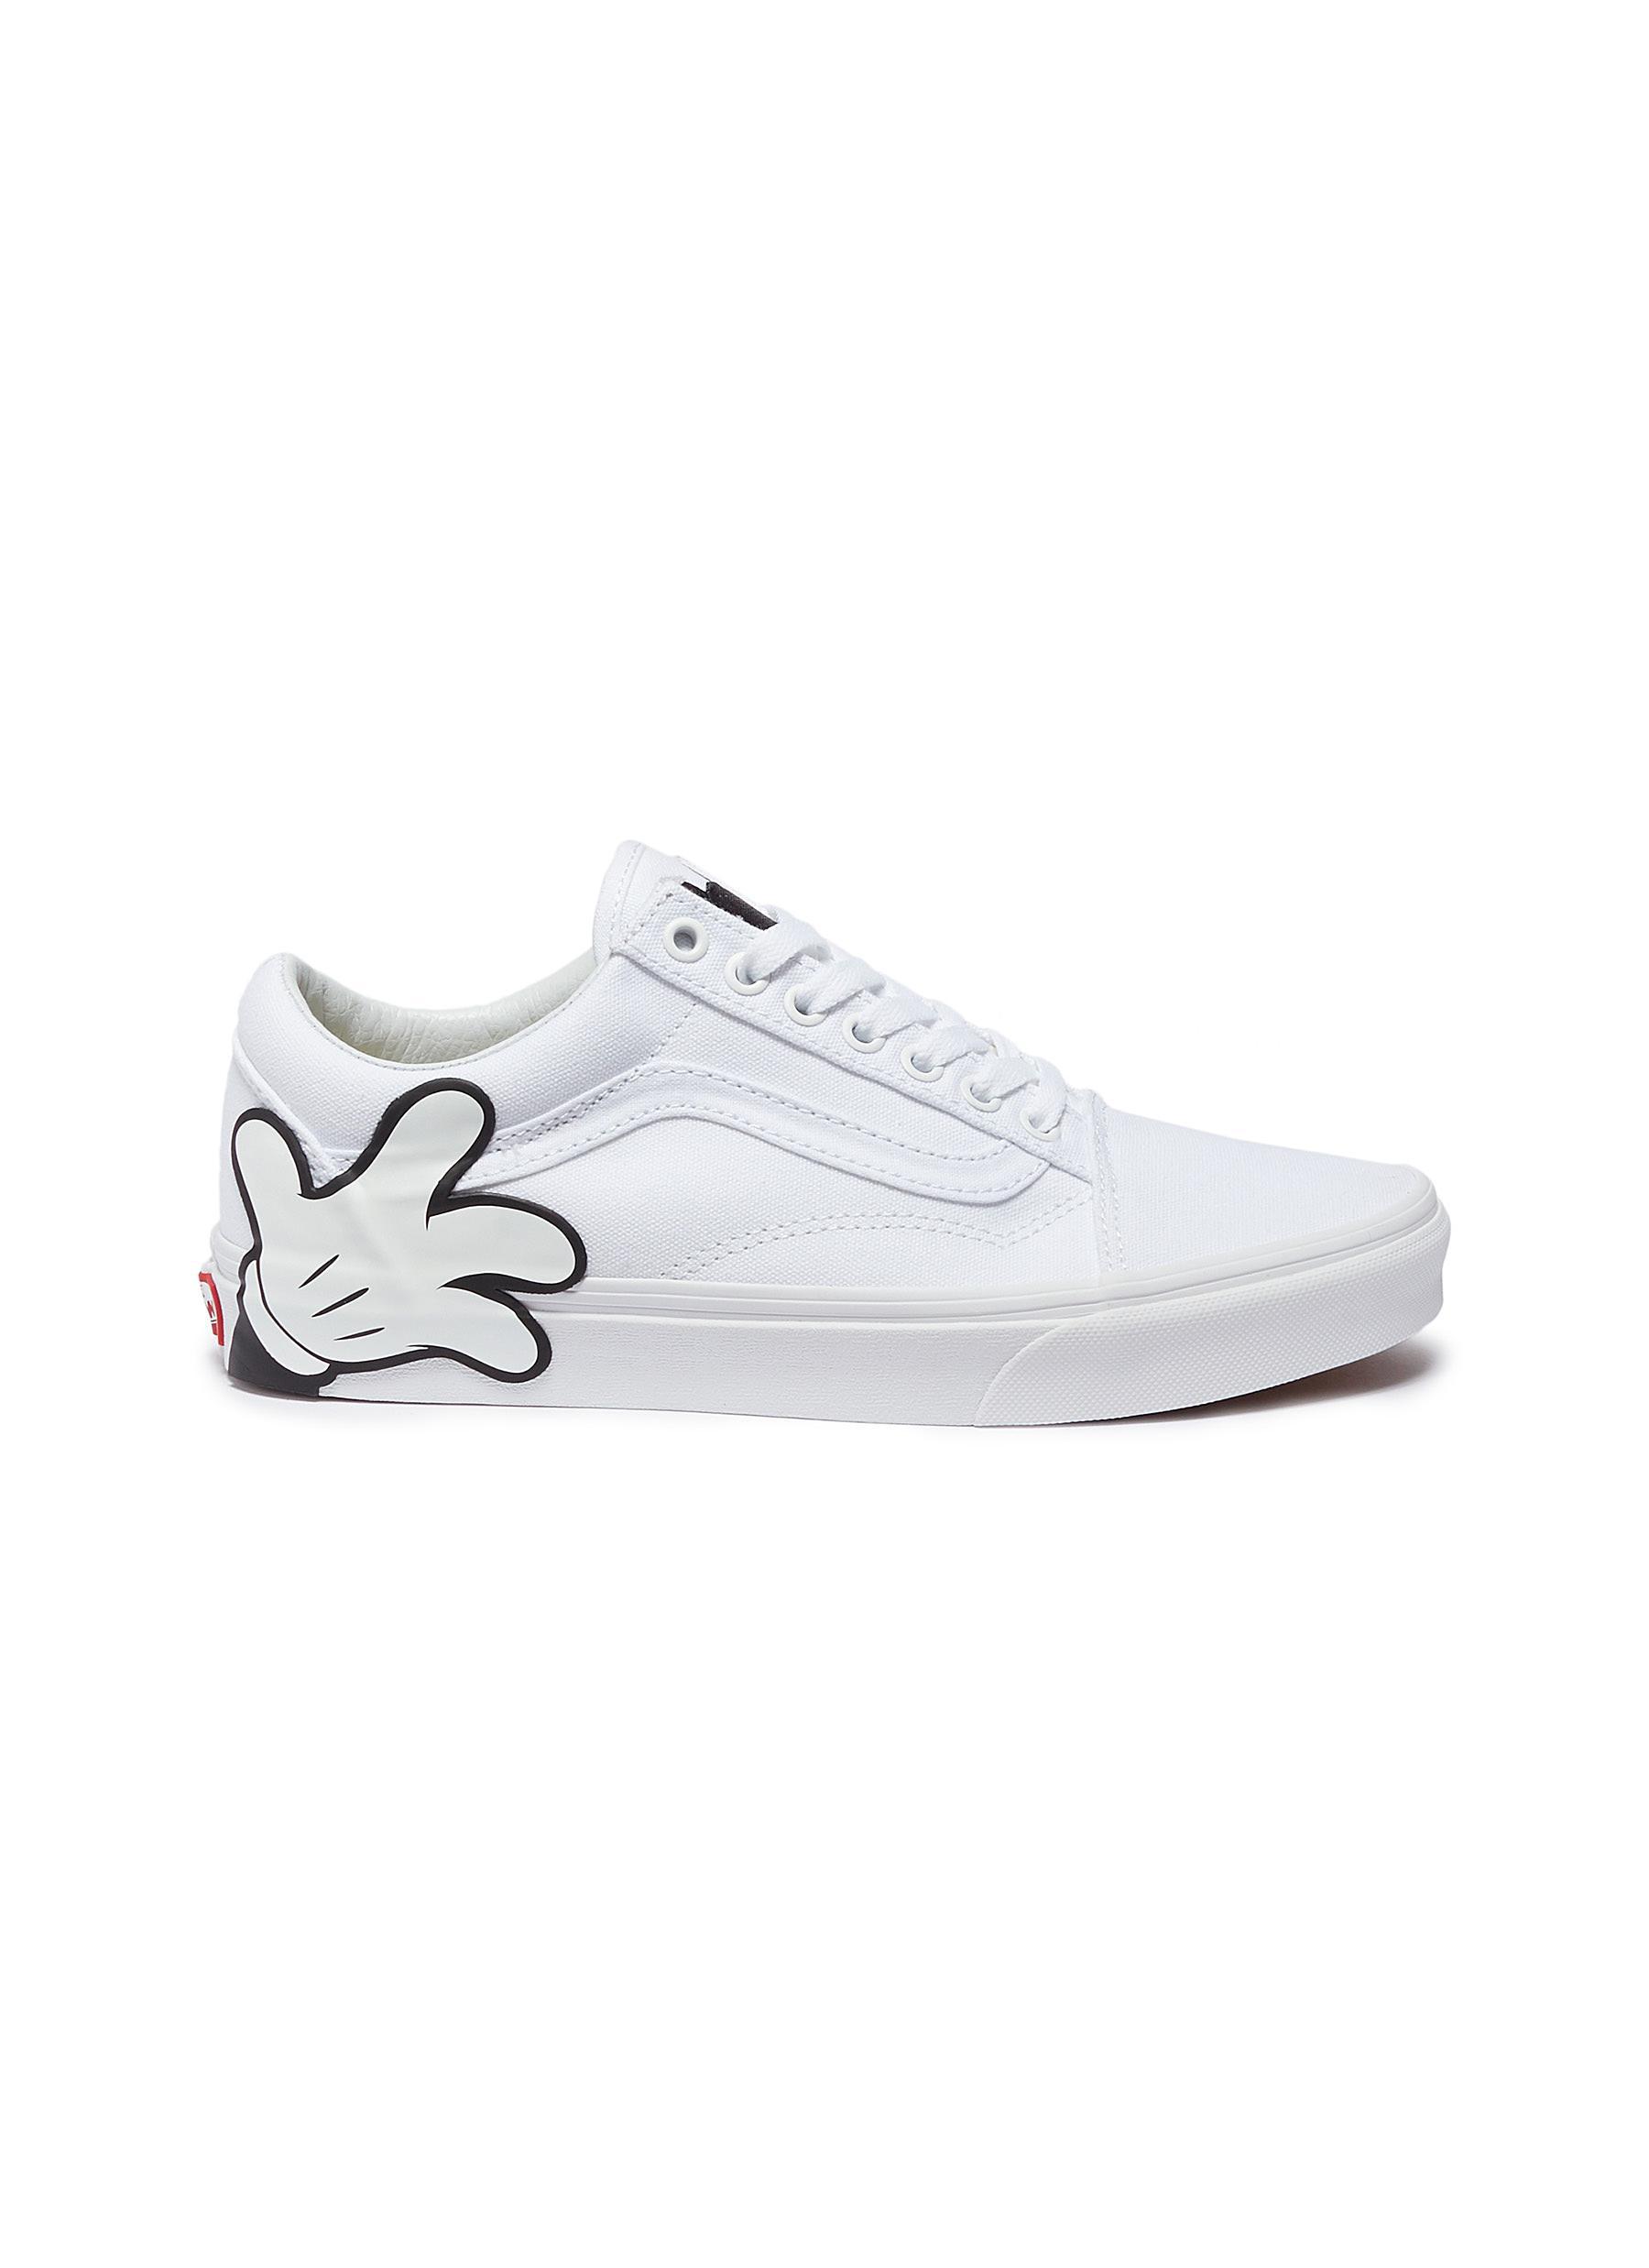 mickey mouse vans with hands